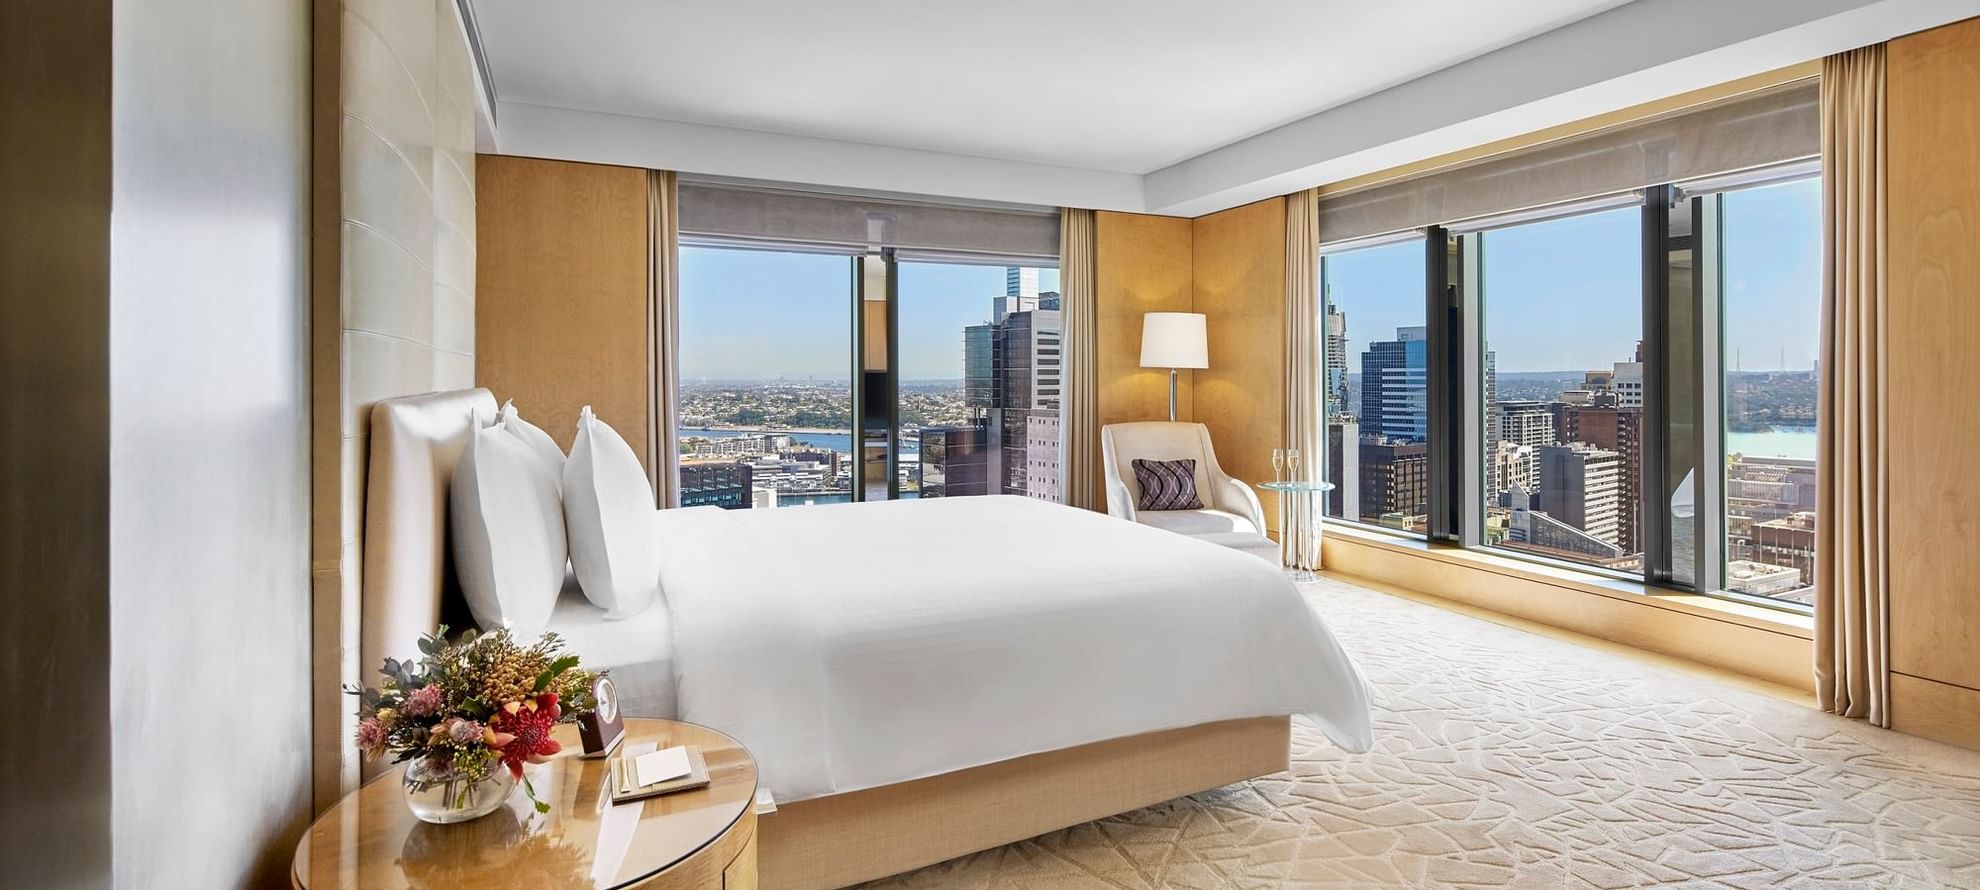 King bed & city view in Executive Suite at Fullerton Sydney